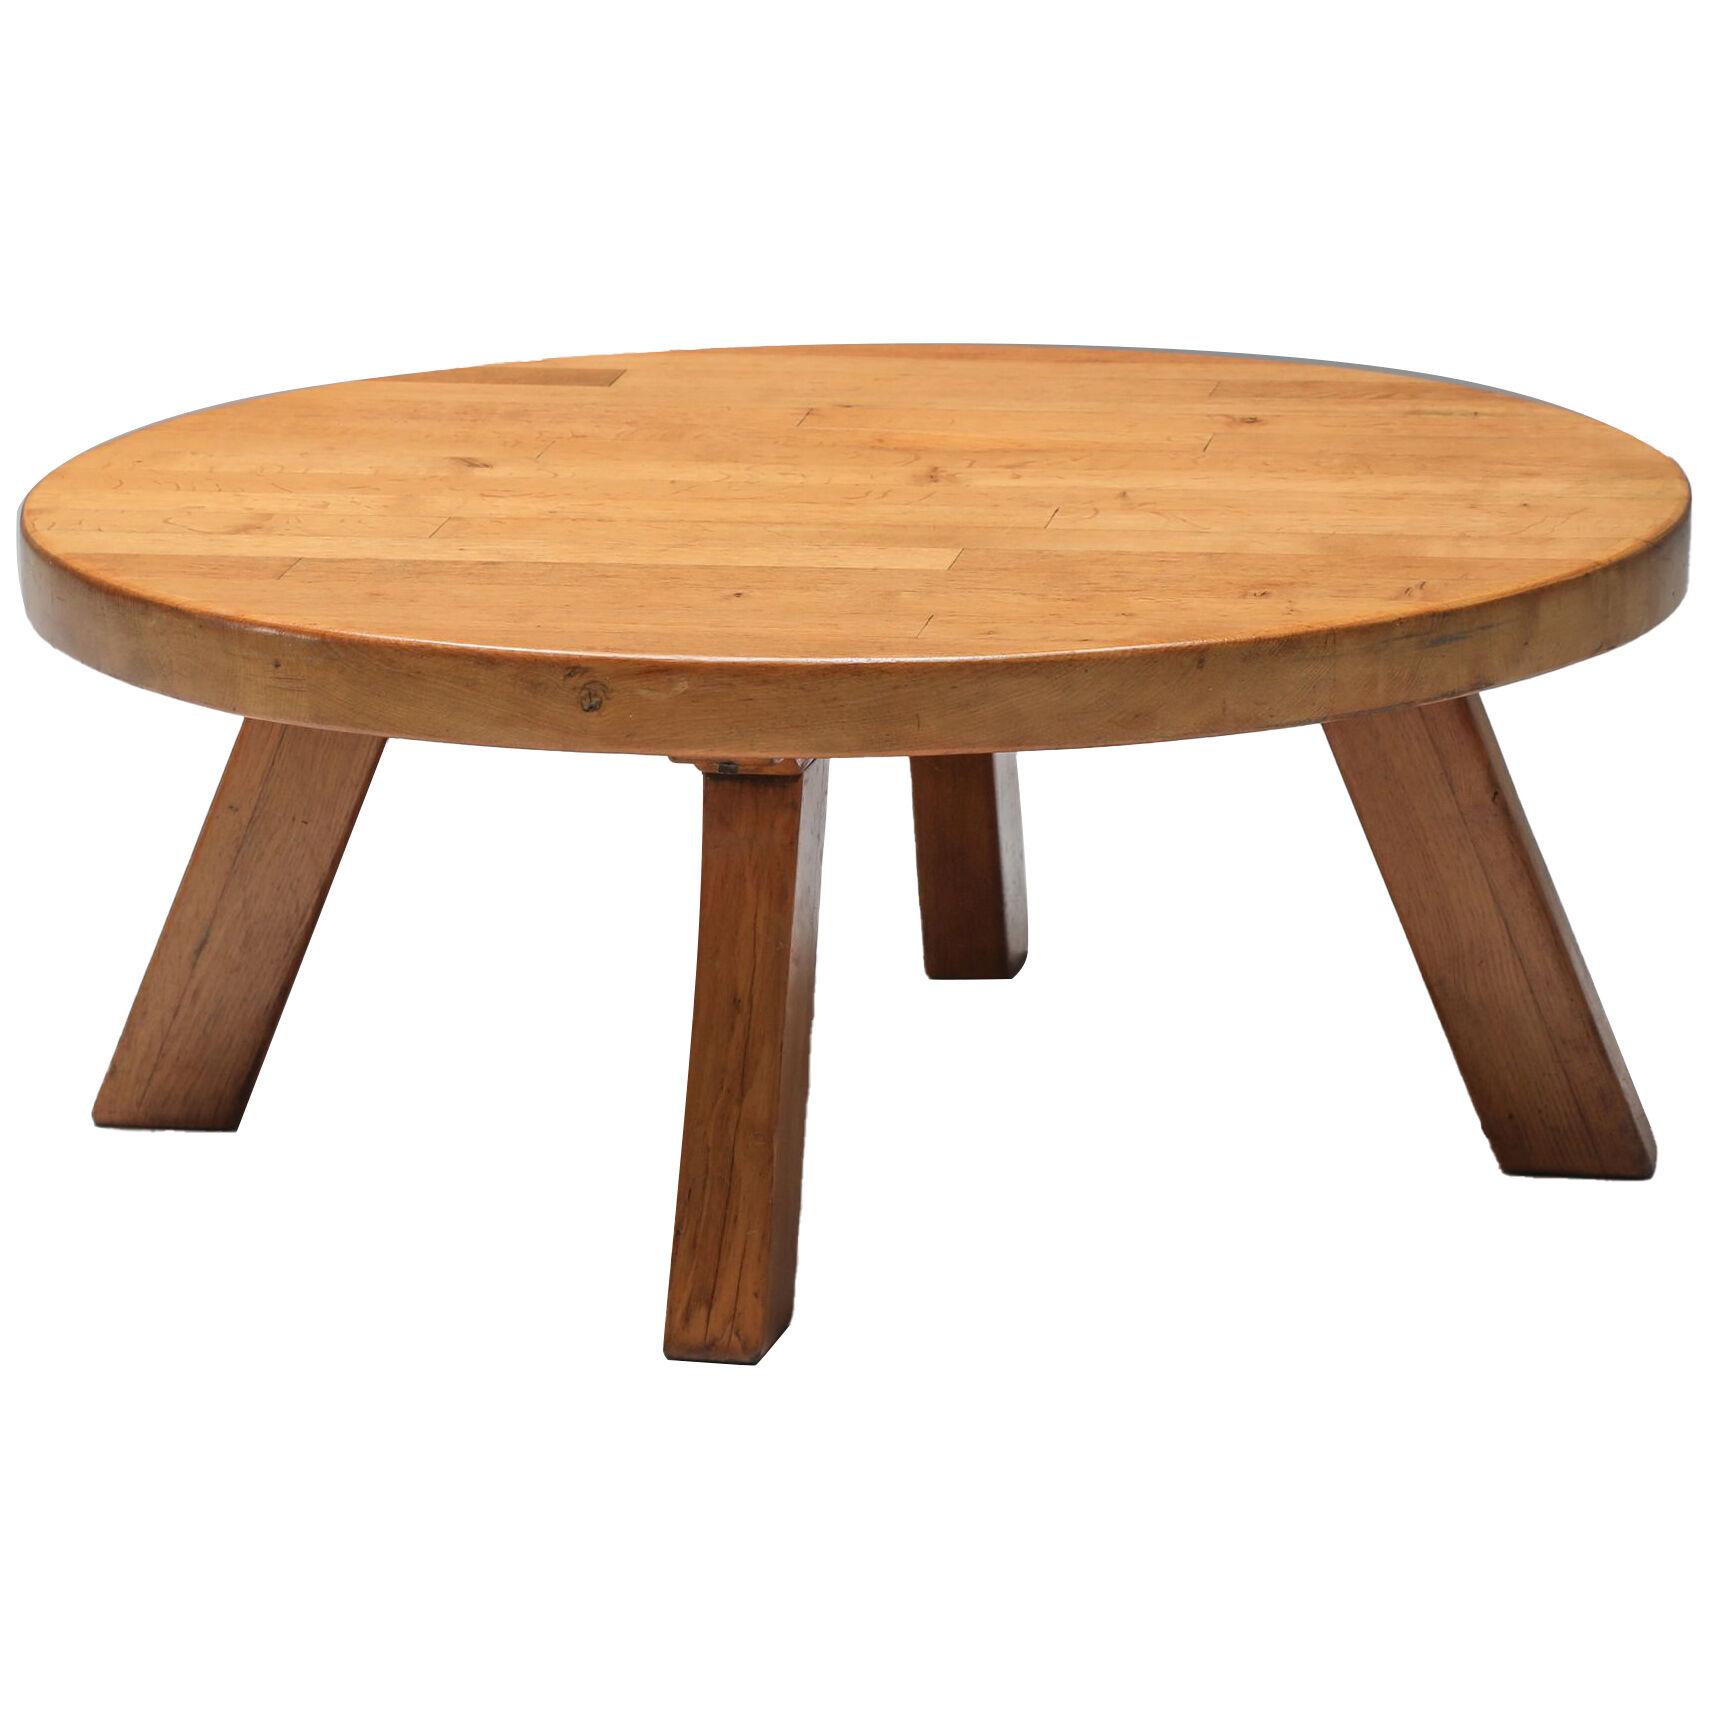 Charlotte Perriand Style Round Coffee Table - 1960's